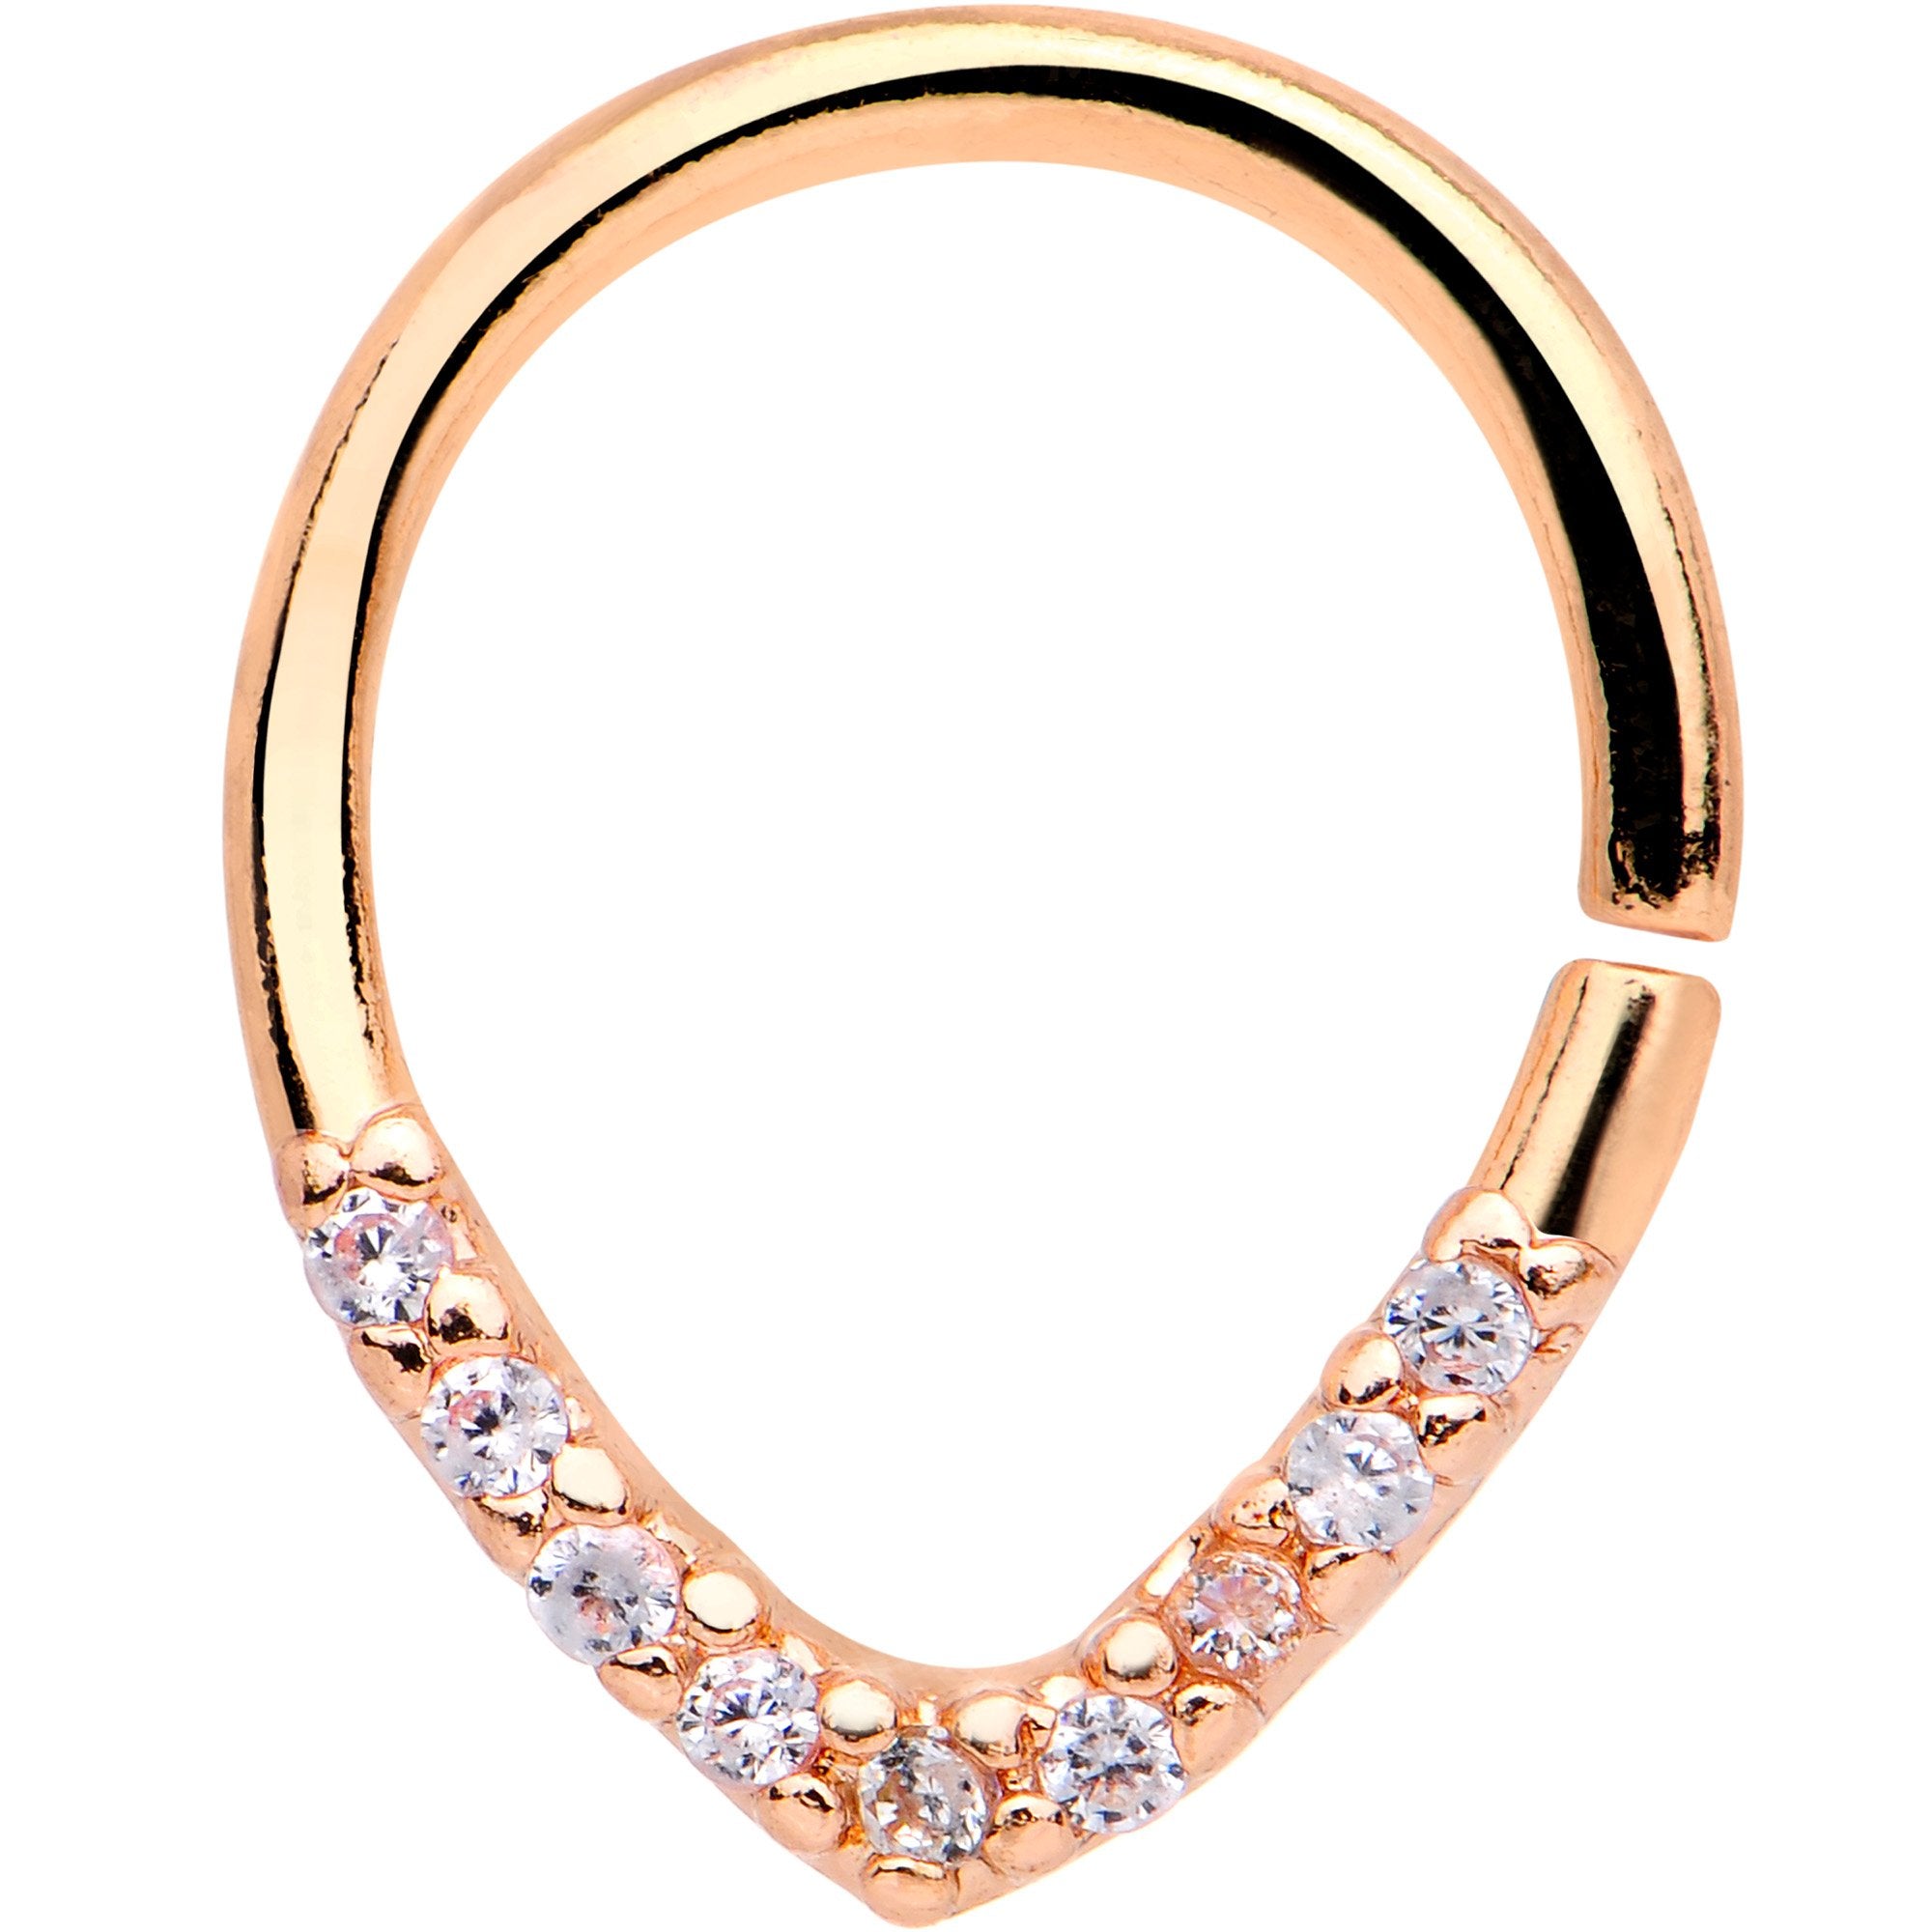 16 Gauge 3/8 Clear CZ Rose Gold Tone Anodized Ellipse Seamless Ring